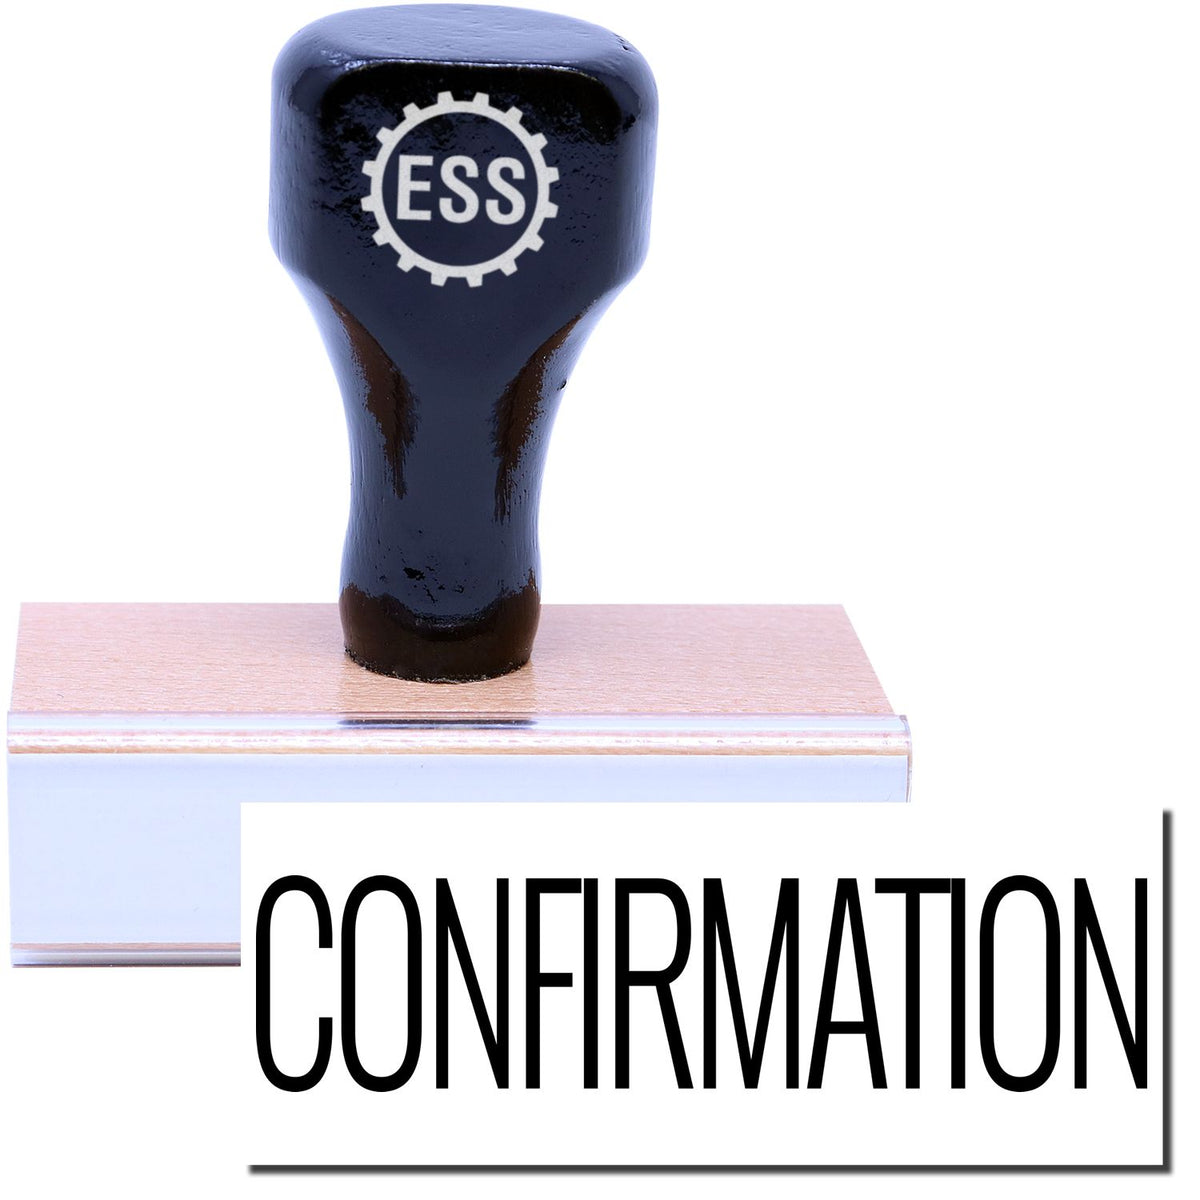 A stock office rubber stamp with a stamped image showing how the text &quot;CONFIRMATION&quot; in a large font is displayed after stamping.